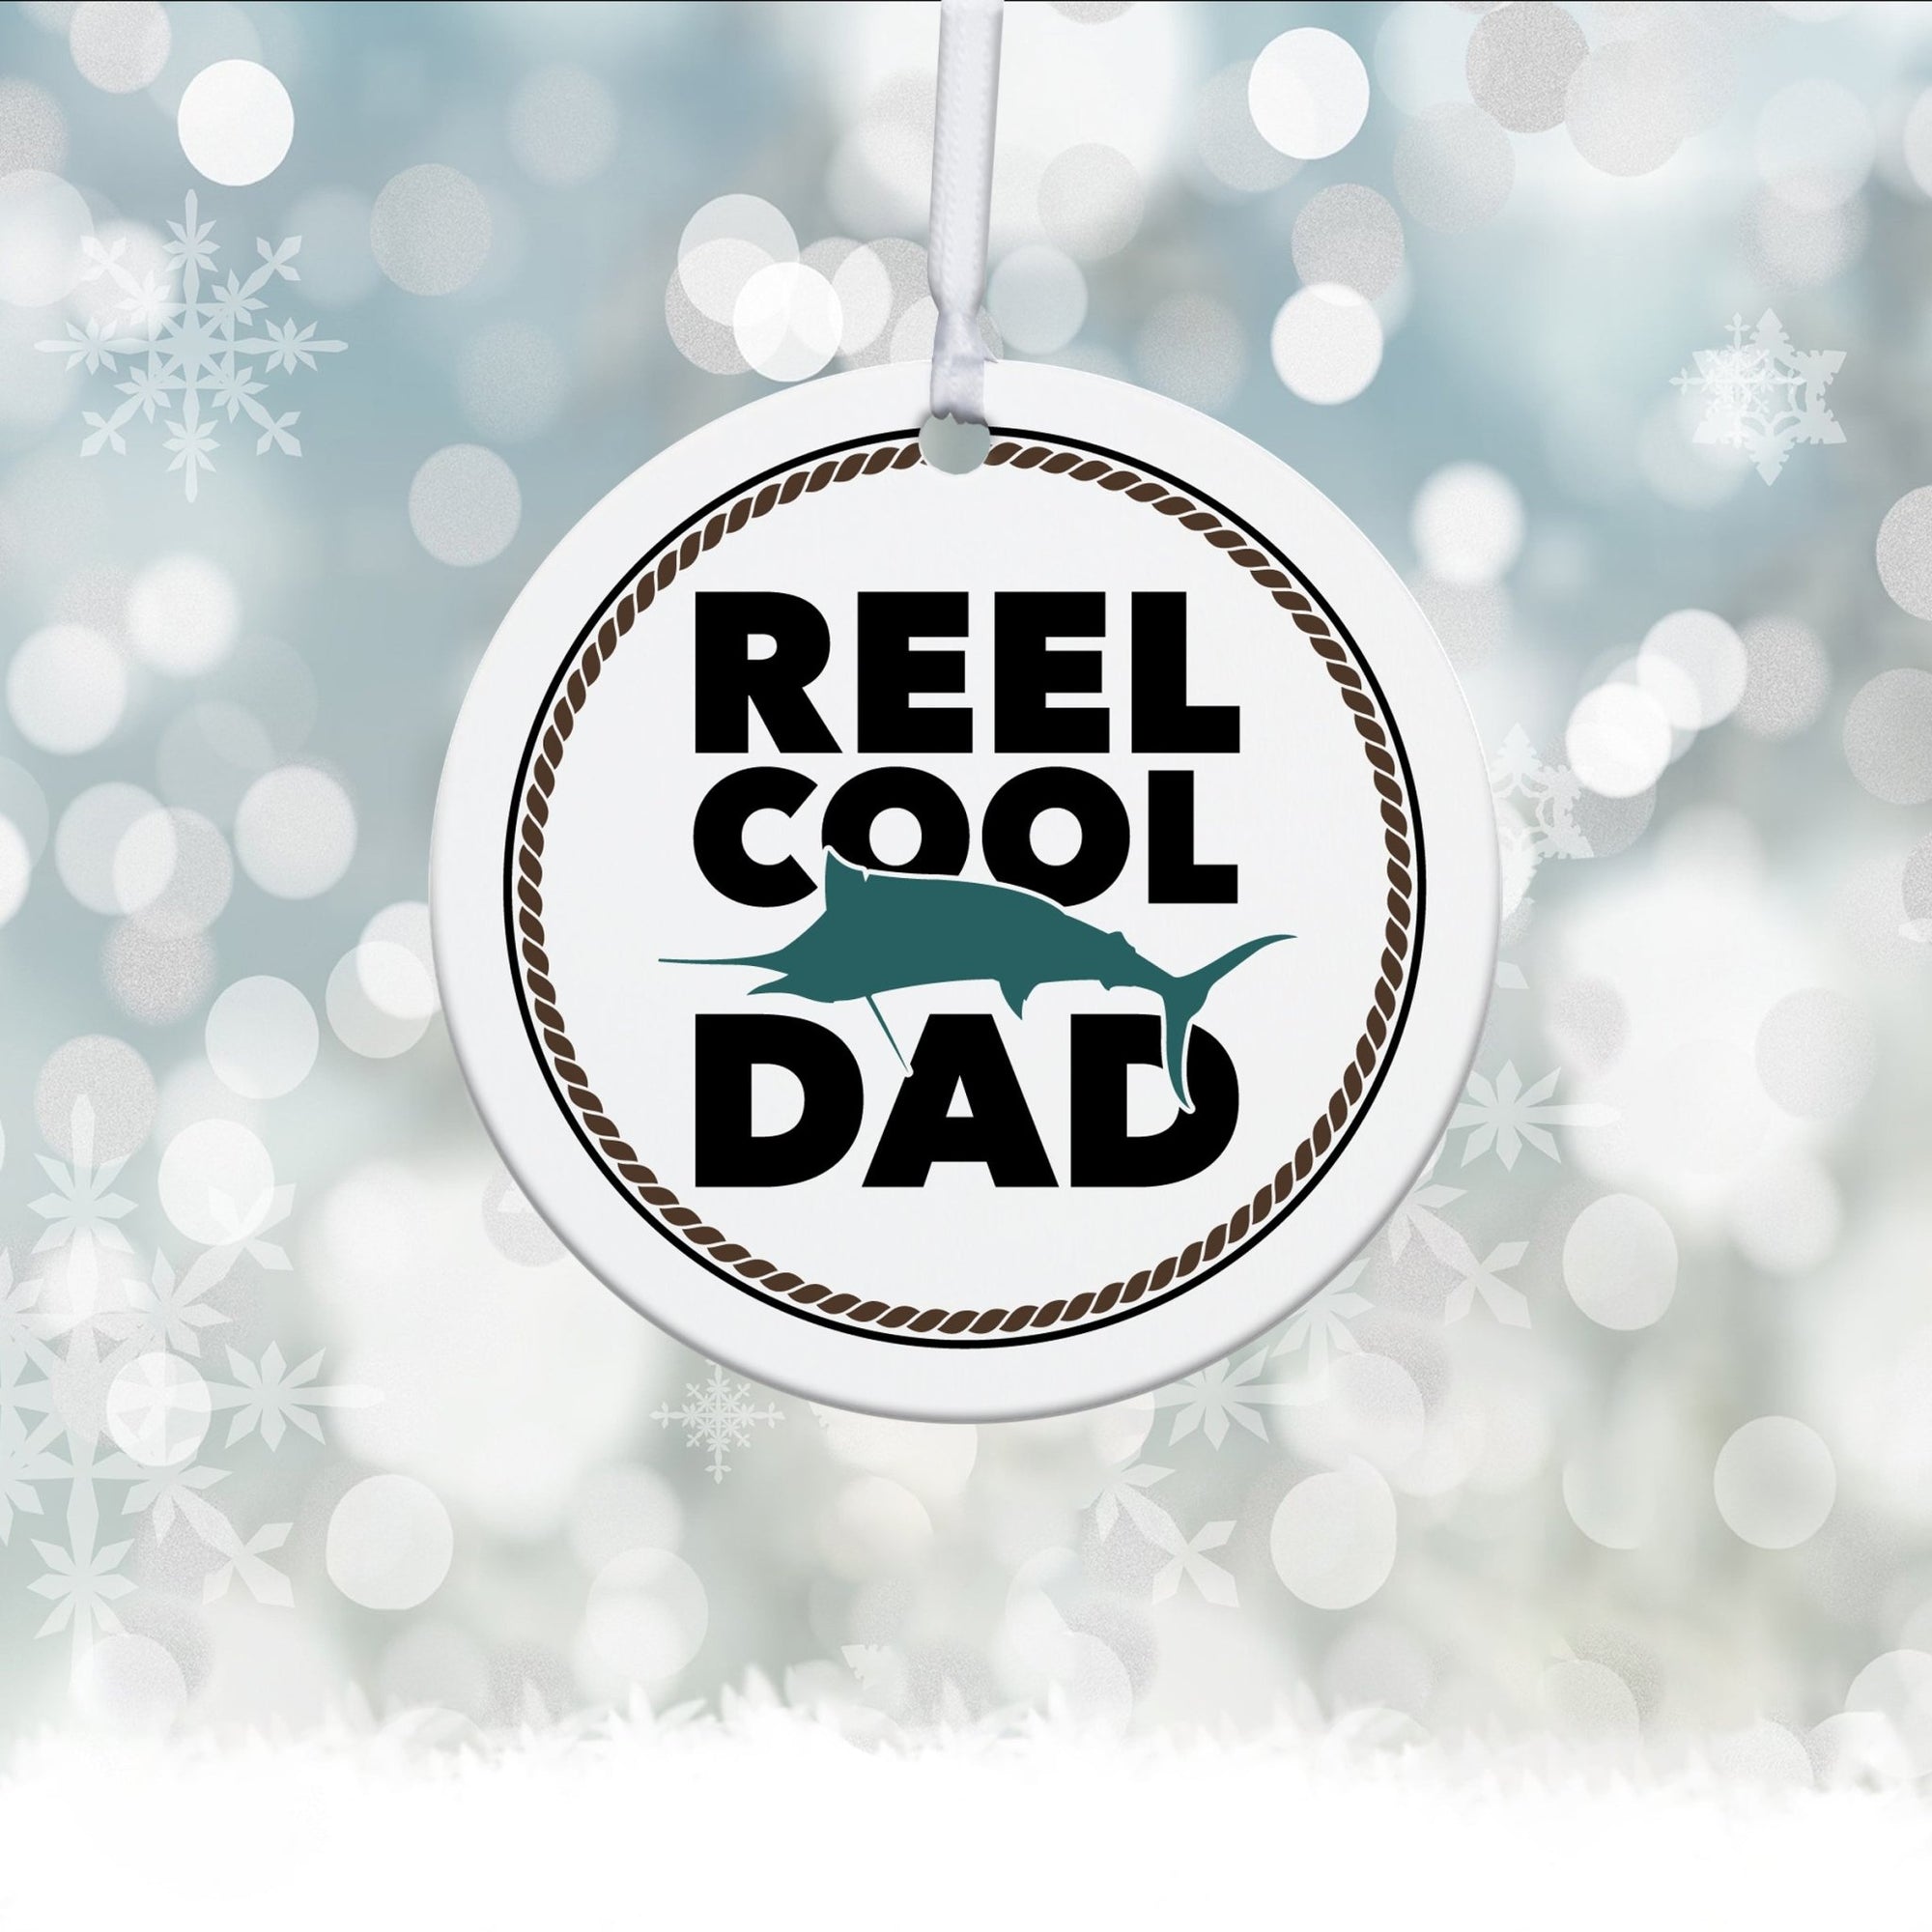 Fishing Dad White Ornament With Inspirational Message Gift Ideas - Reel Cool Dad - LifeSong Milestones